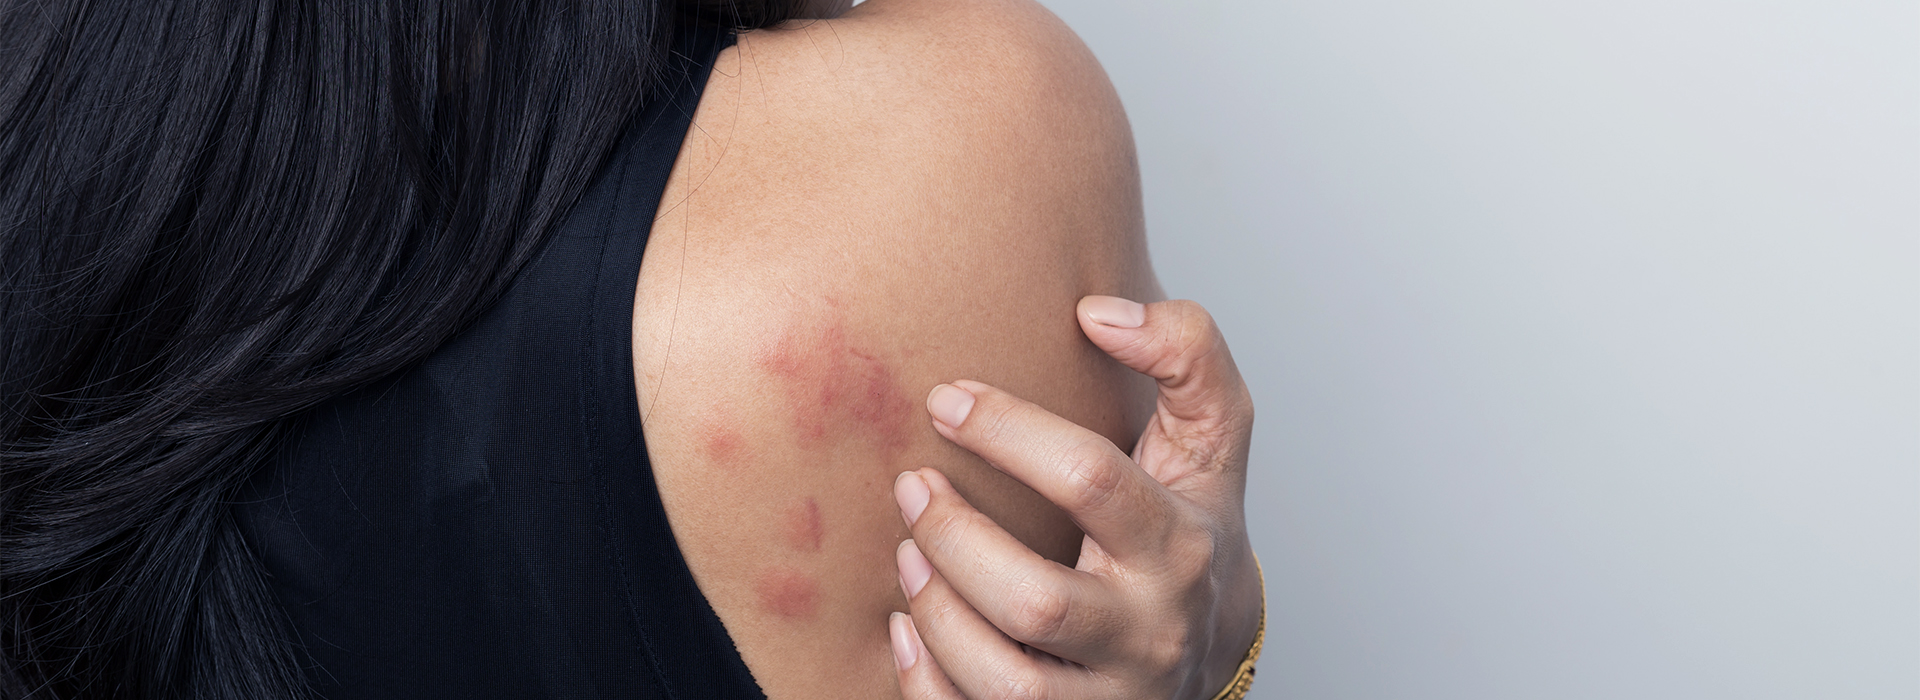 Skin Rashes And Growths Areas Of Care Sonoran Patients